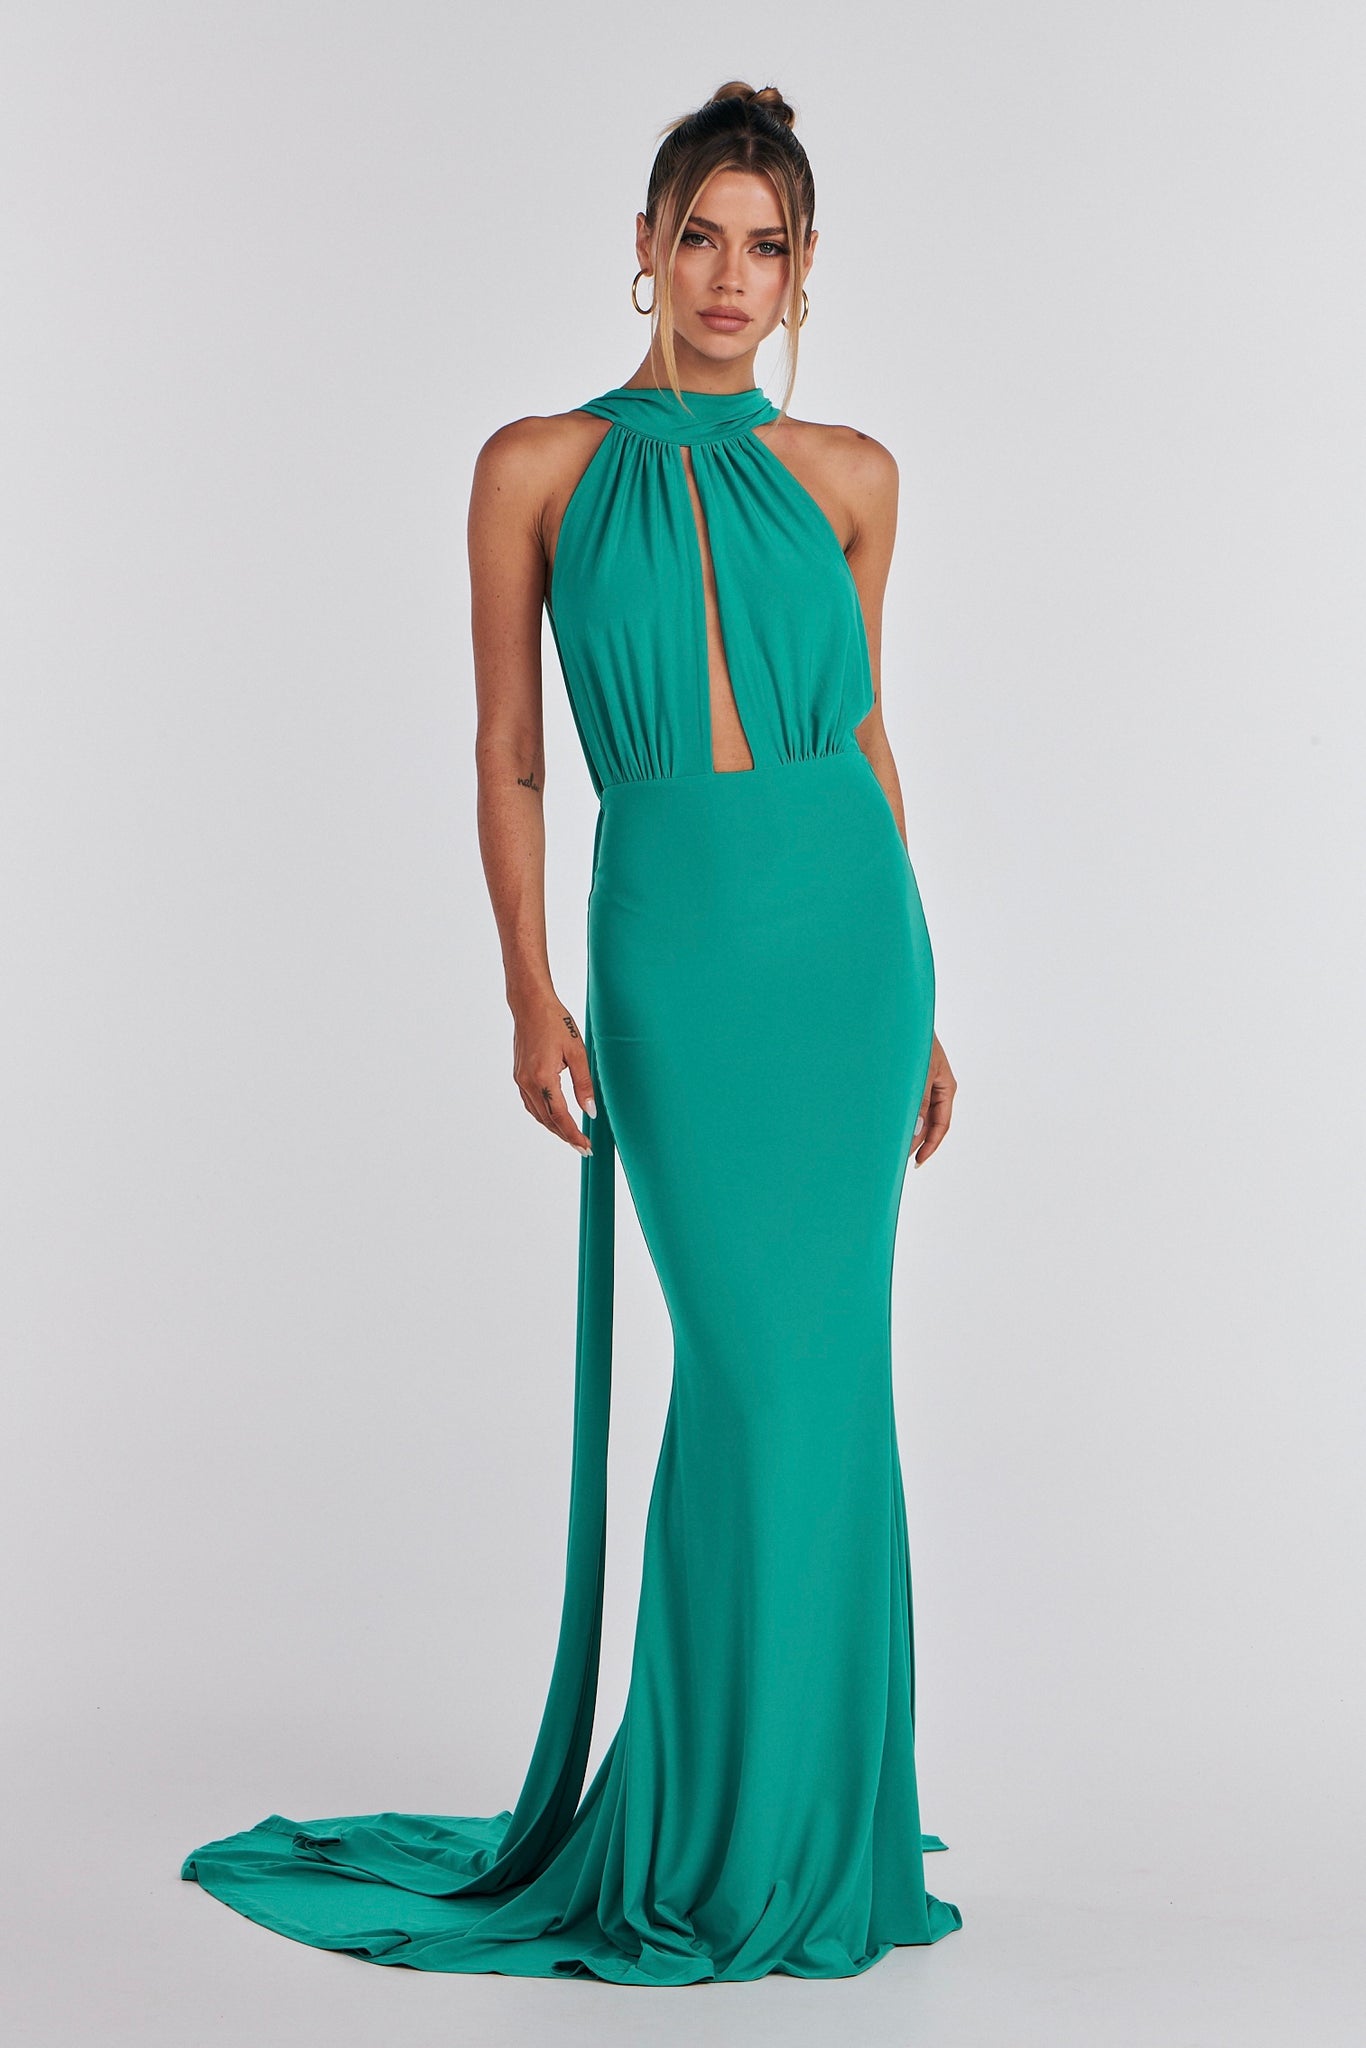 MÉLANI The Label LUCIA Jade Keyhole Neckline Backless Bridesmaid Formal Gown